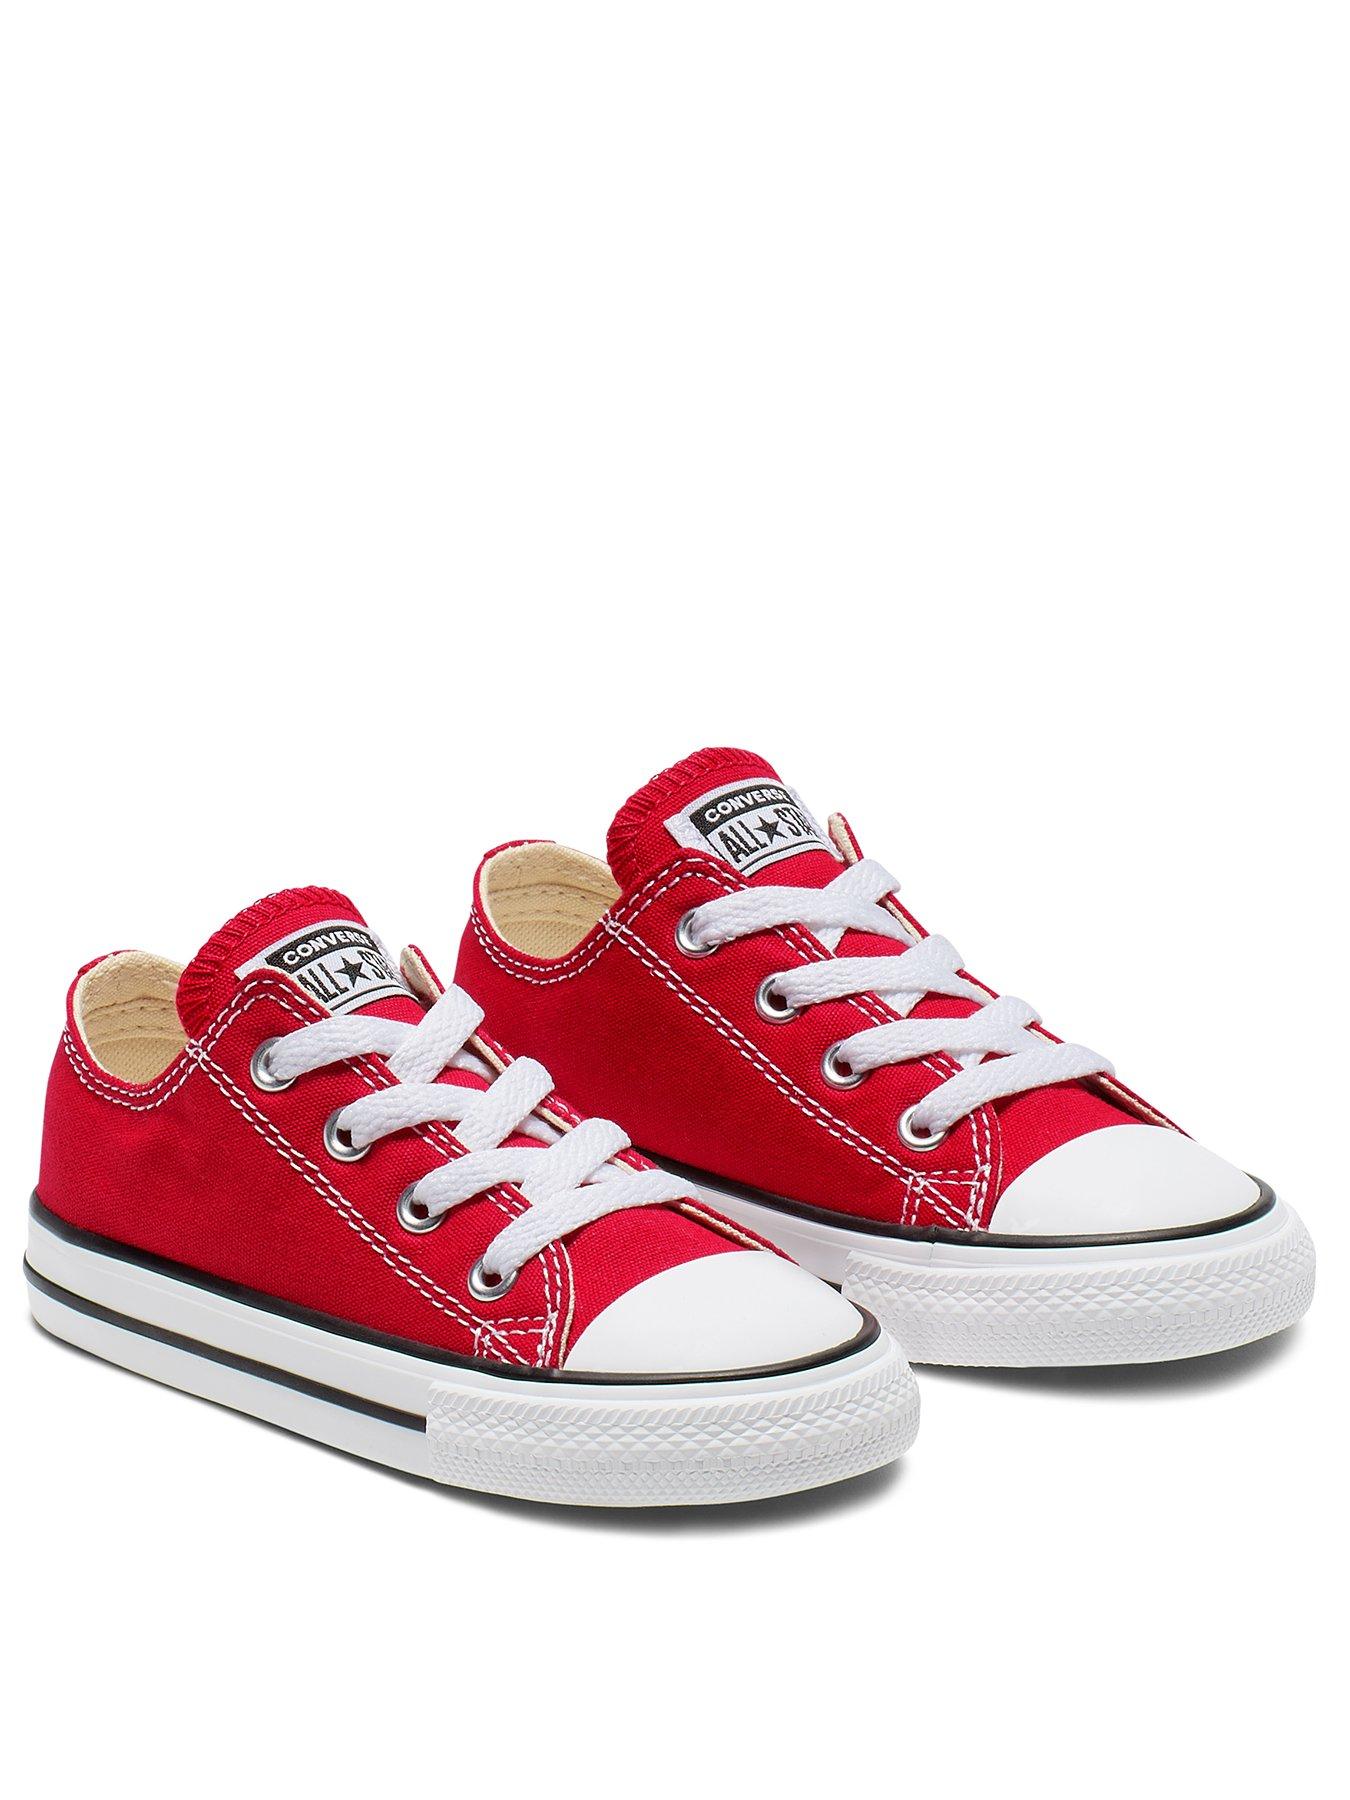 Kids Chuck Taylor All Star Ox Infant Unisex Trainers -Red